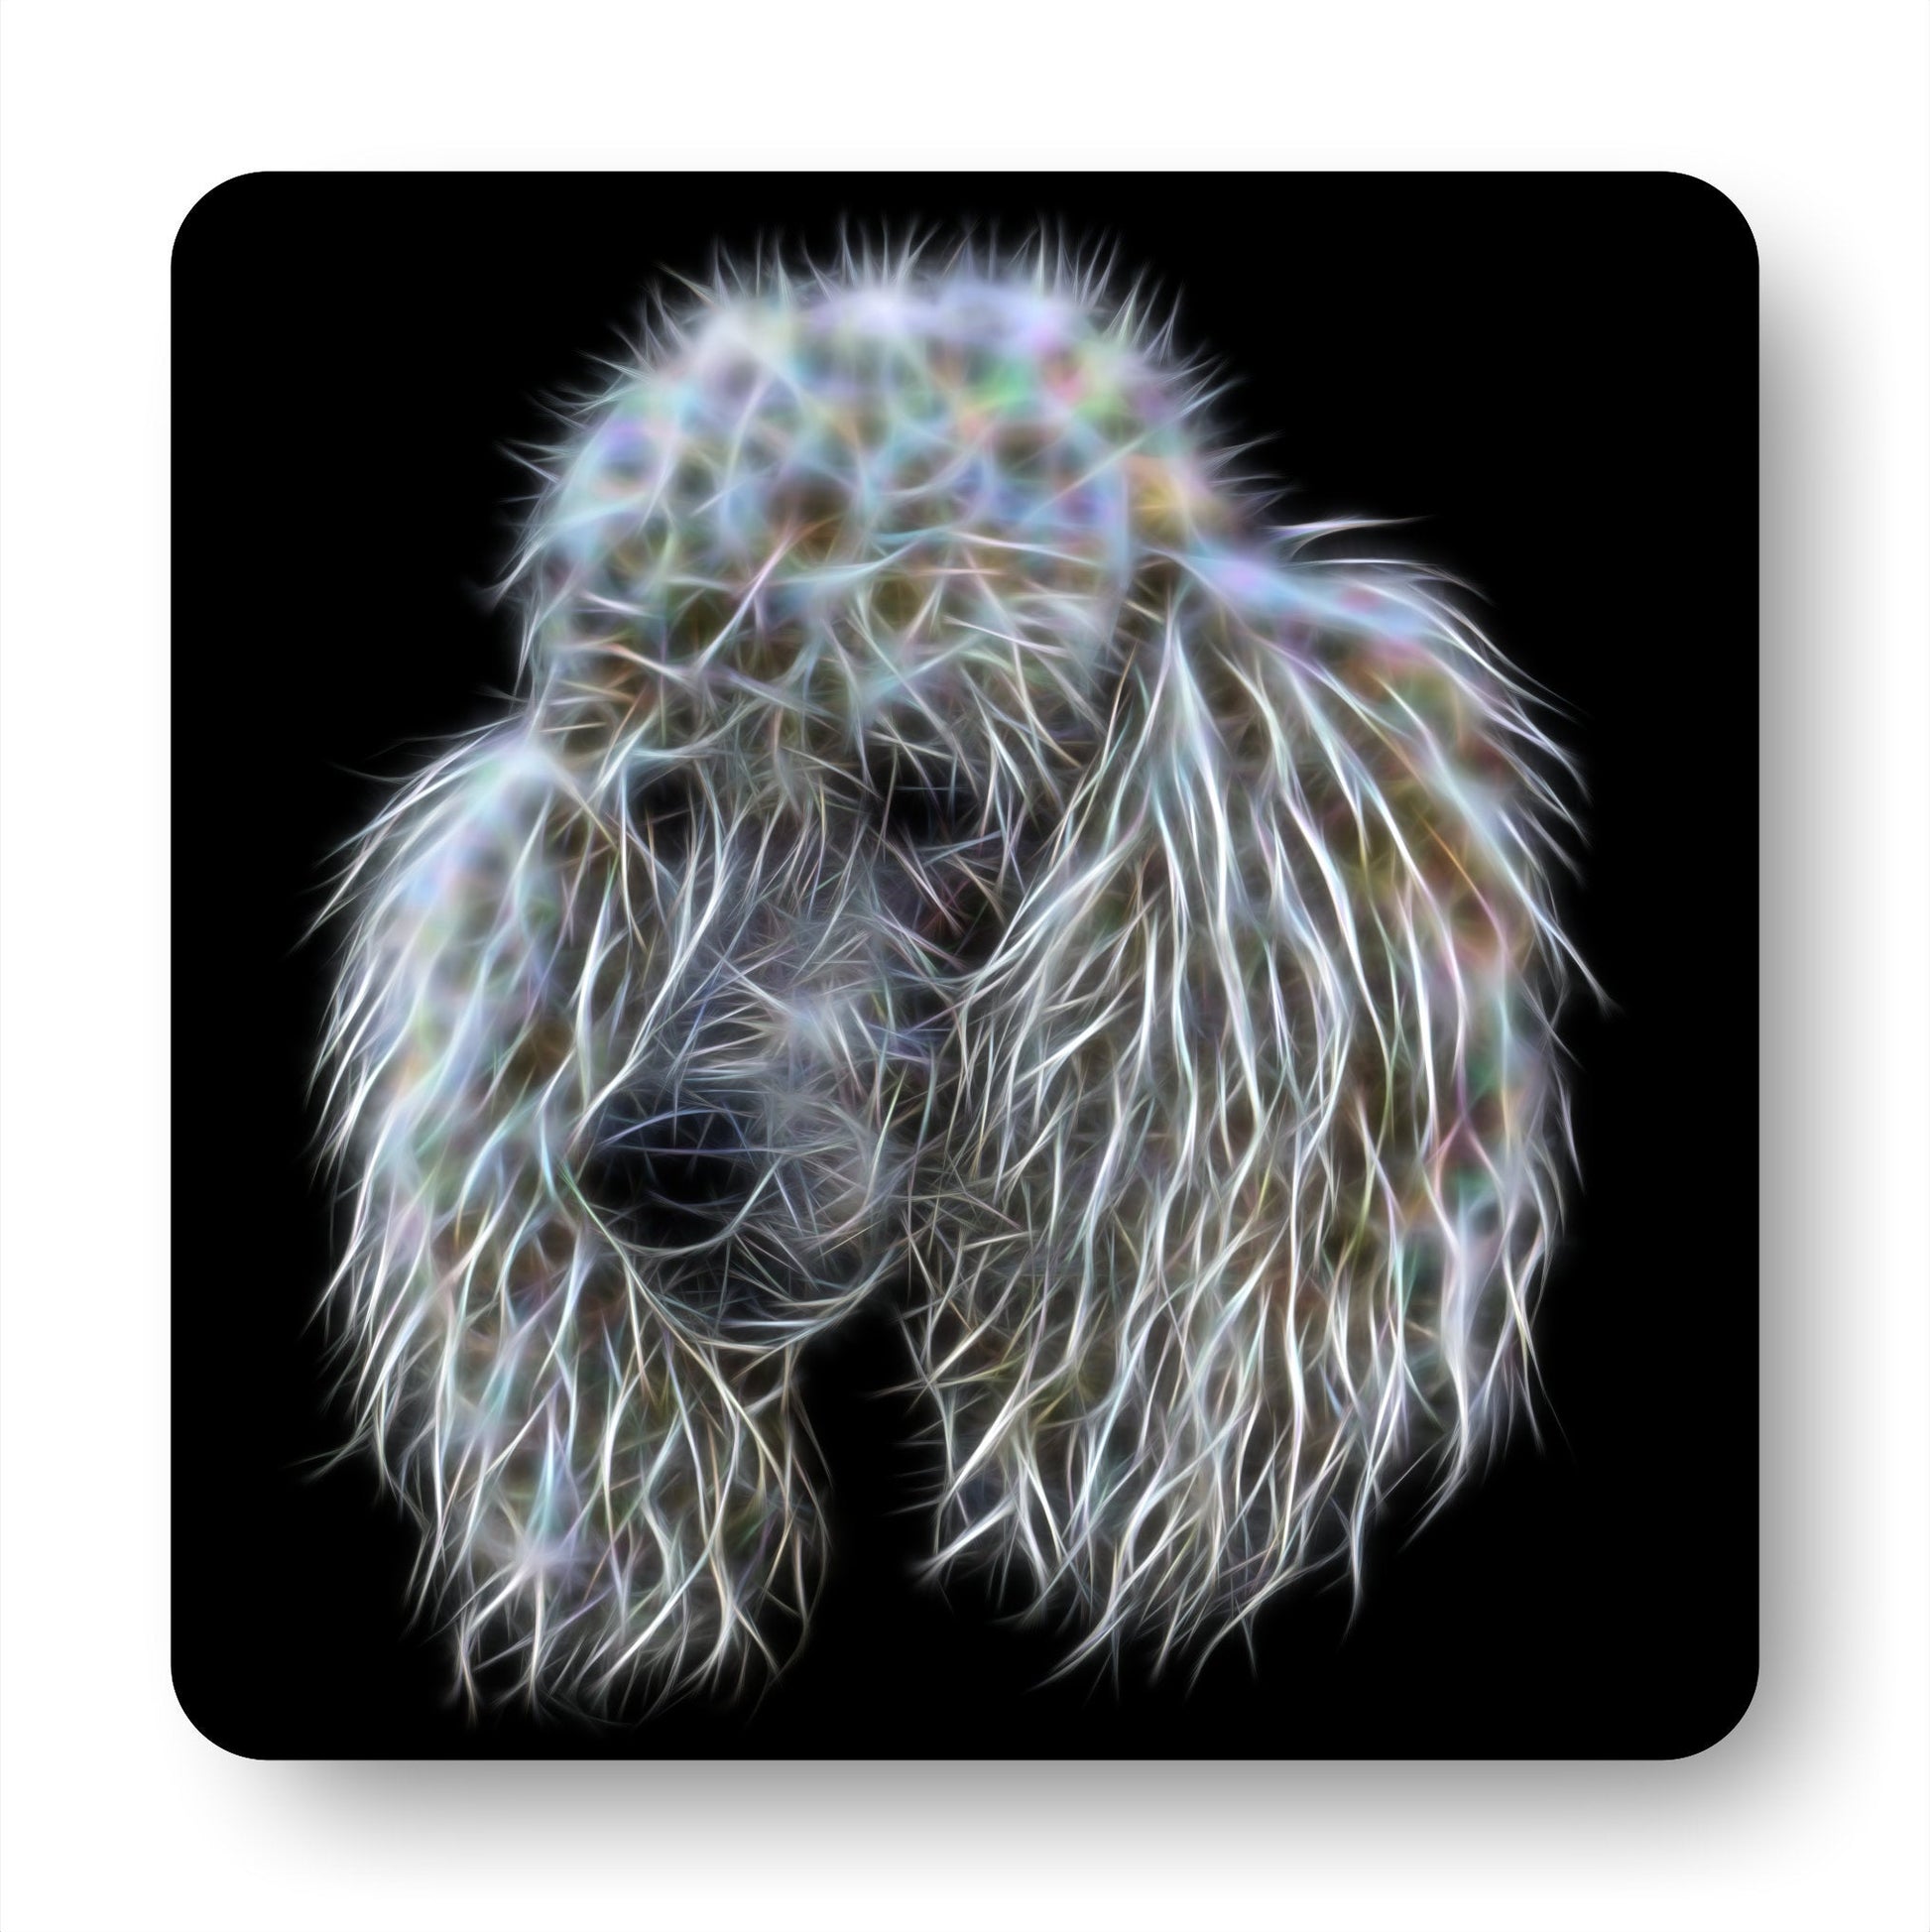 White Standard Poodle Coasters, Set of 4, with Stunning Fractal Art Design. Perfect Poodle Owner Gift.